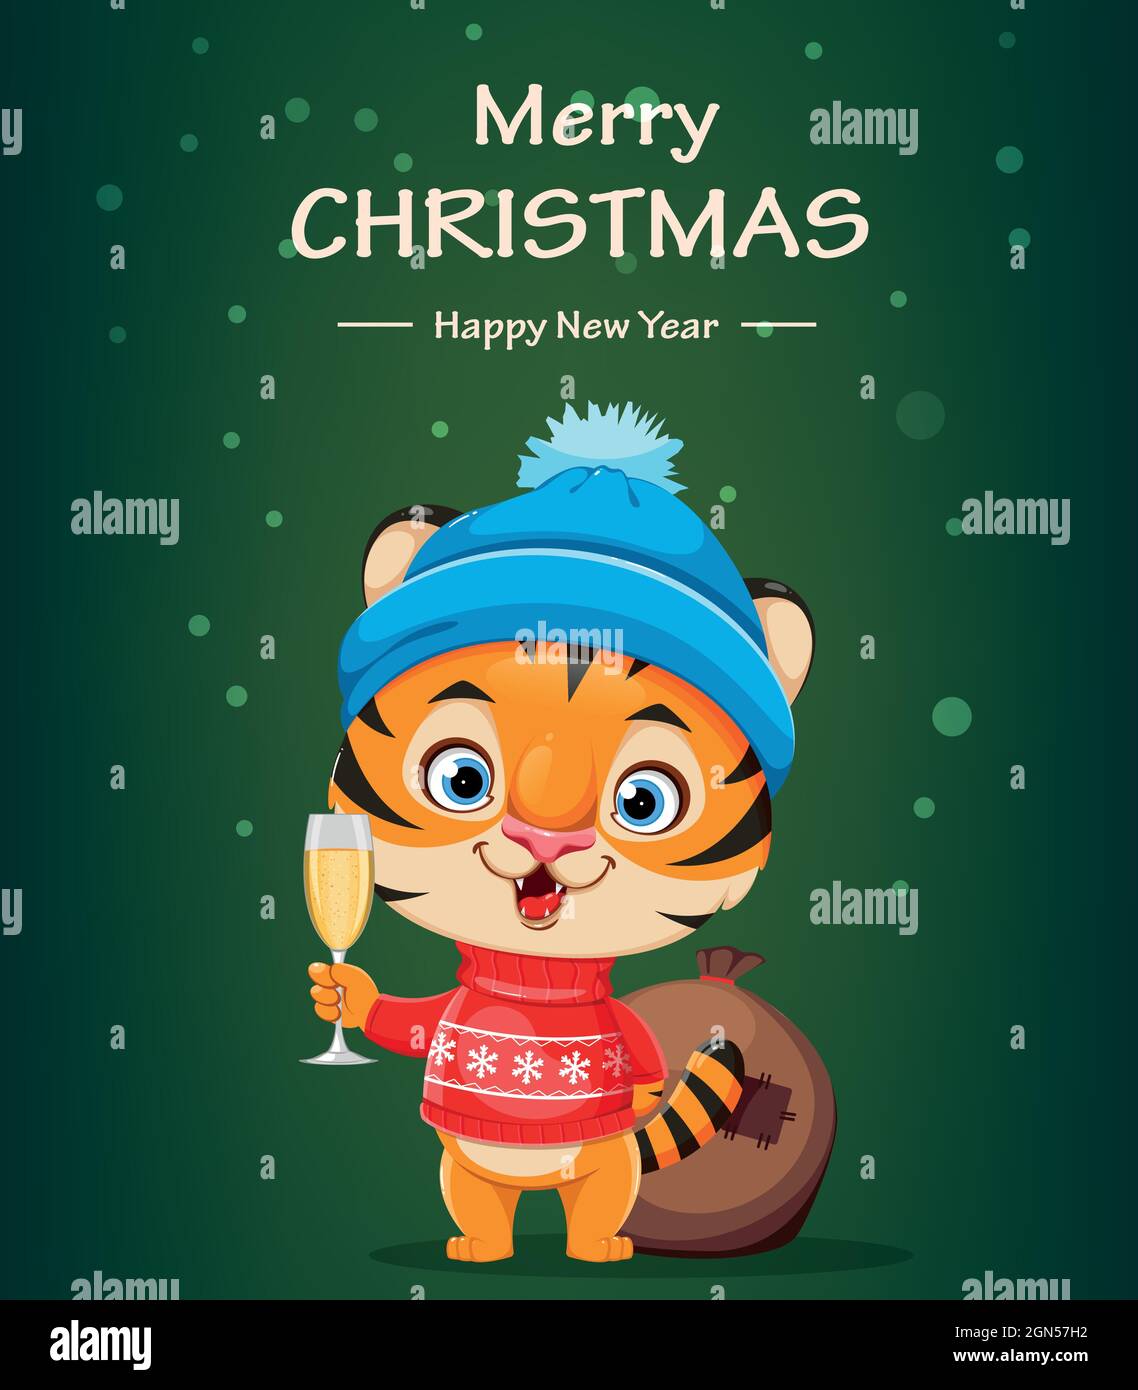 Merry Christmas greeting card. Cute cartoon character tiger in warm hat holding a glass of champagne. Stock vector illustration Stock Vector